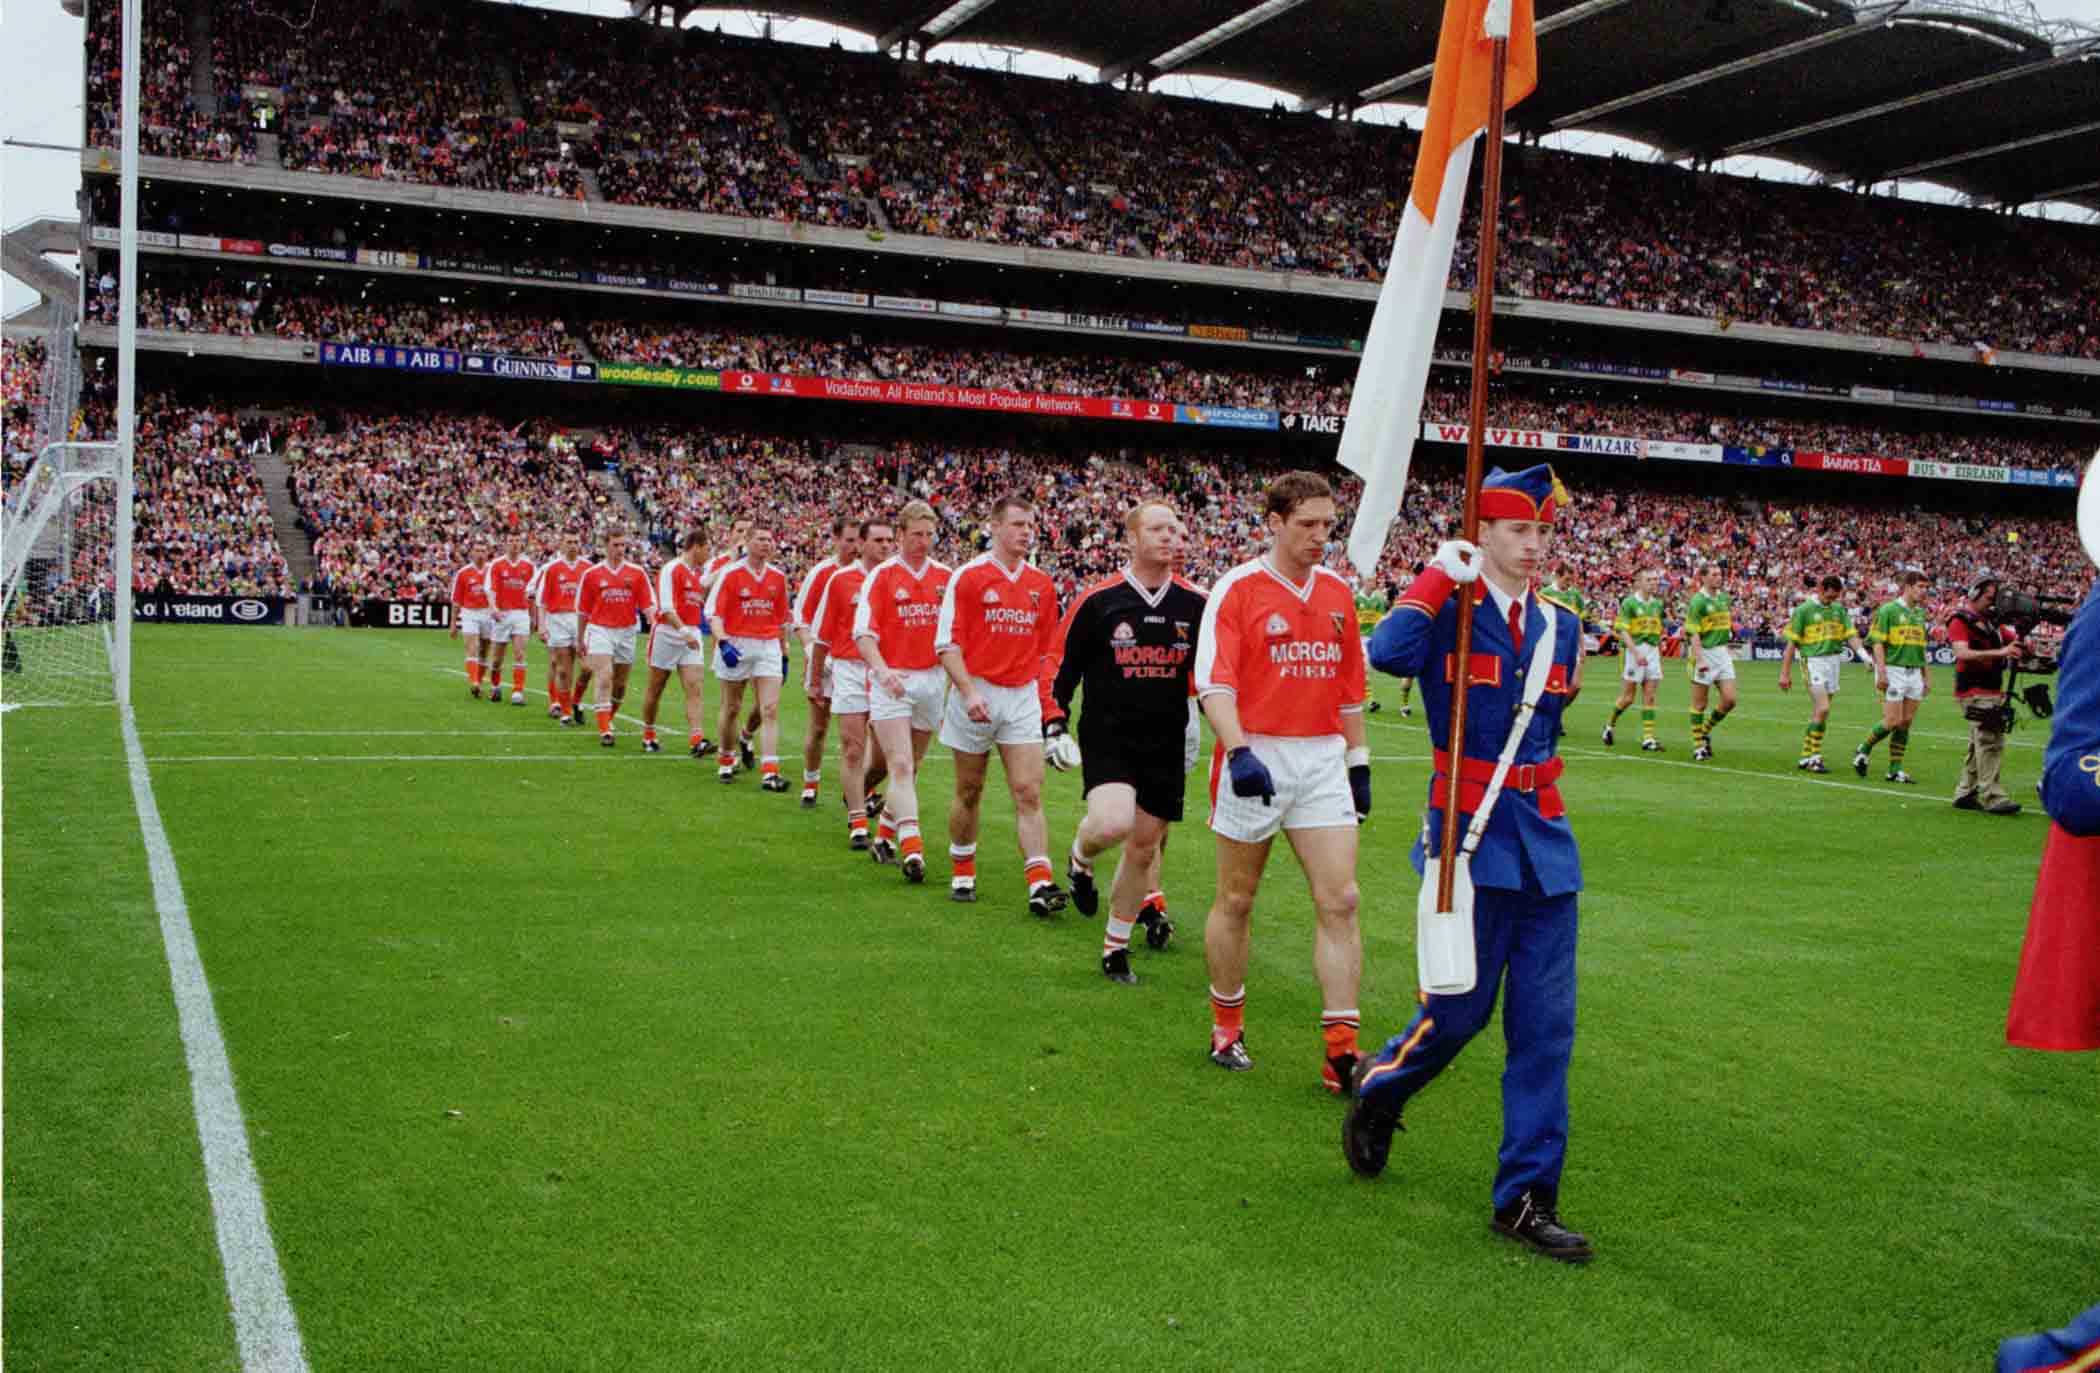 Armagh players ahead of the All-Ireland final vs Kerry in 2002